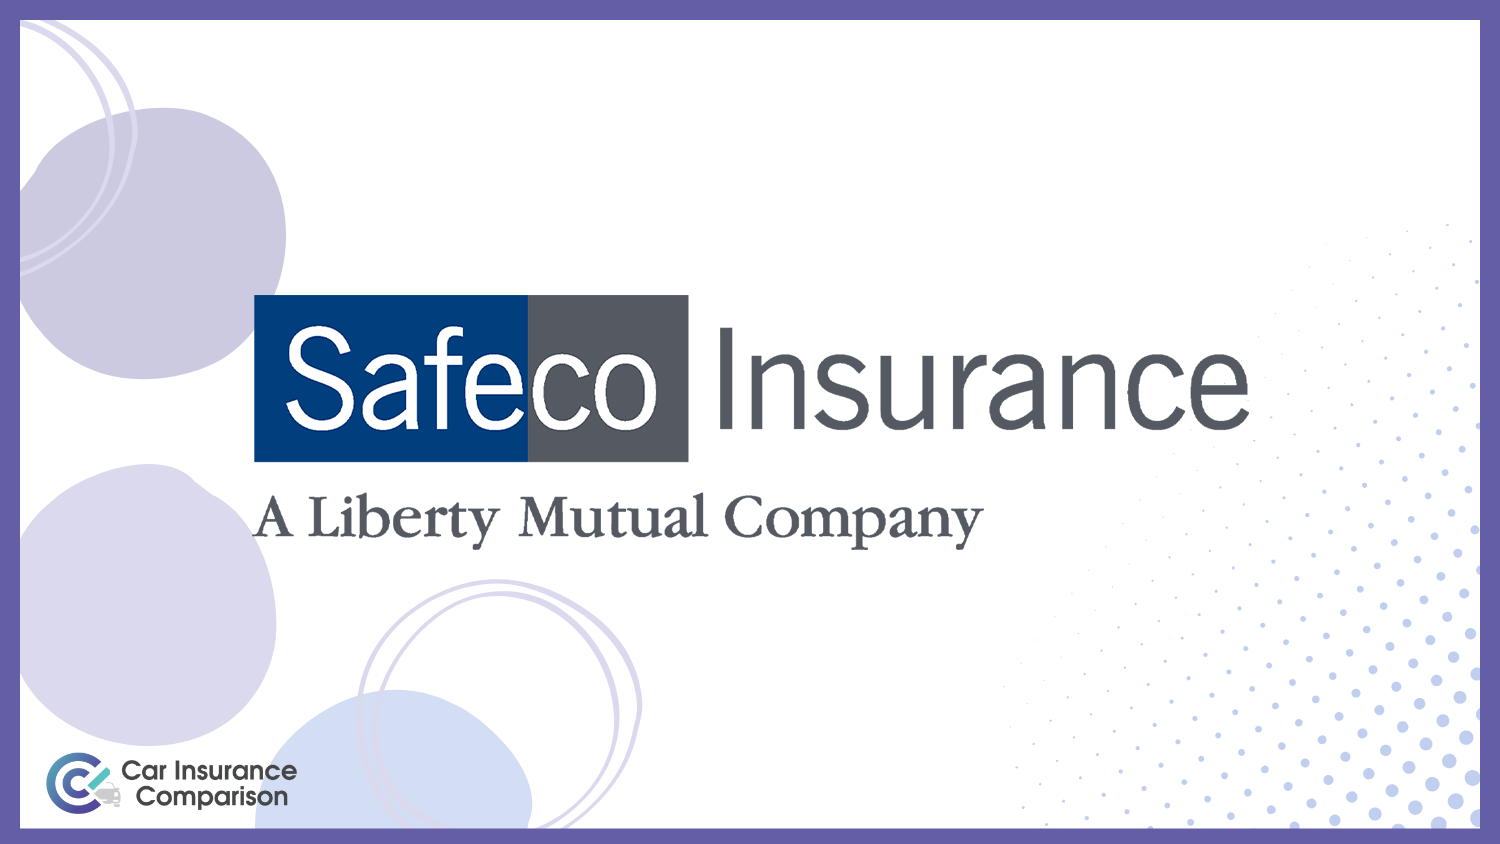 Safeco: Best Car Insurance for Home-Care Worker